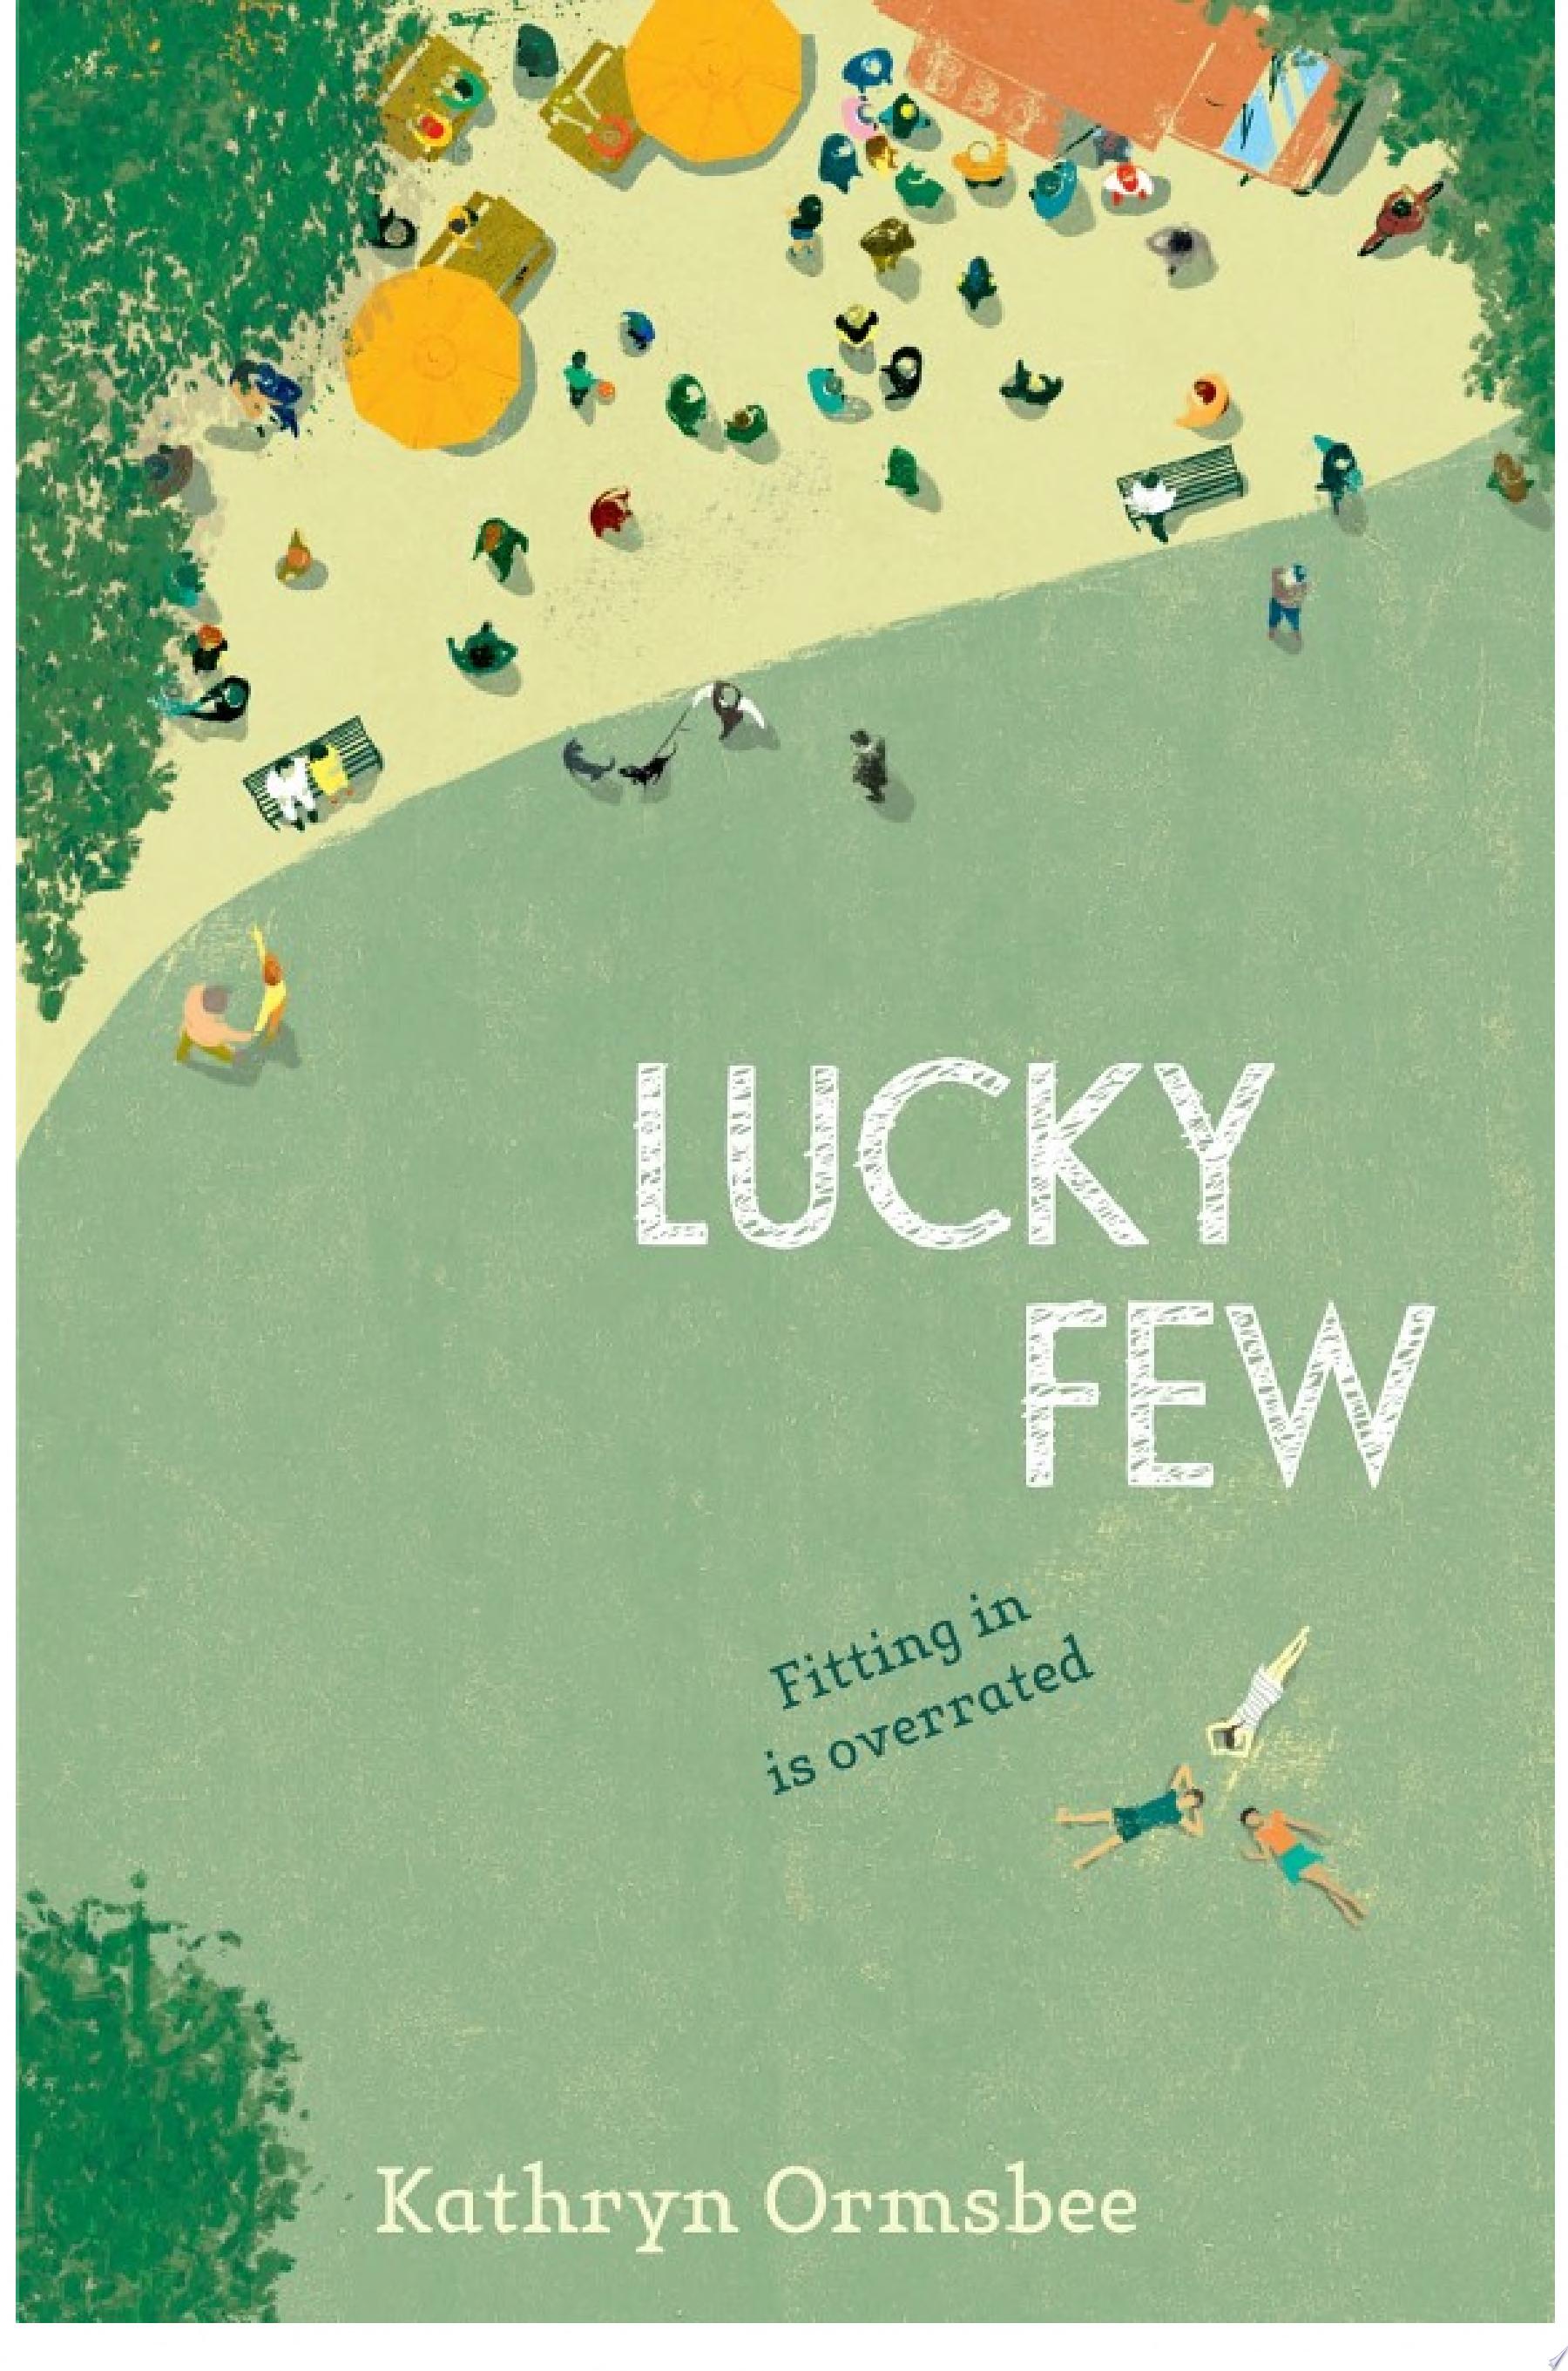 Image for "Lucky Few"